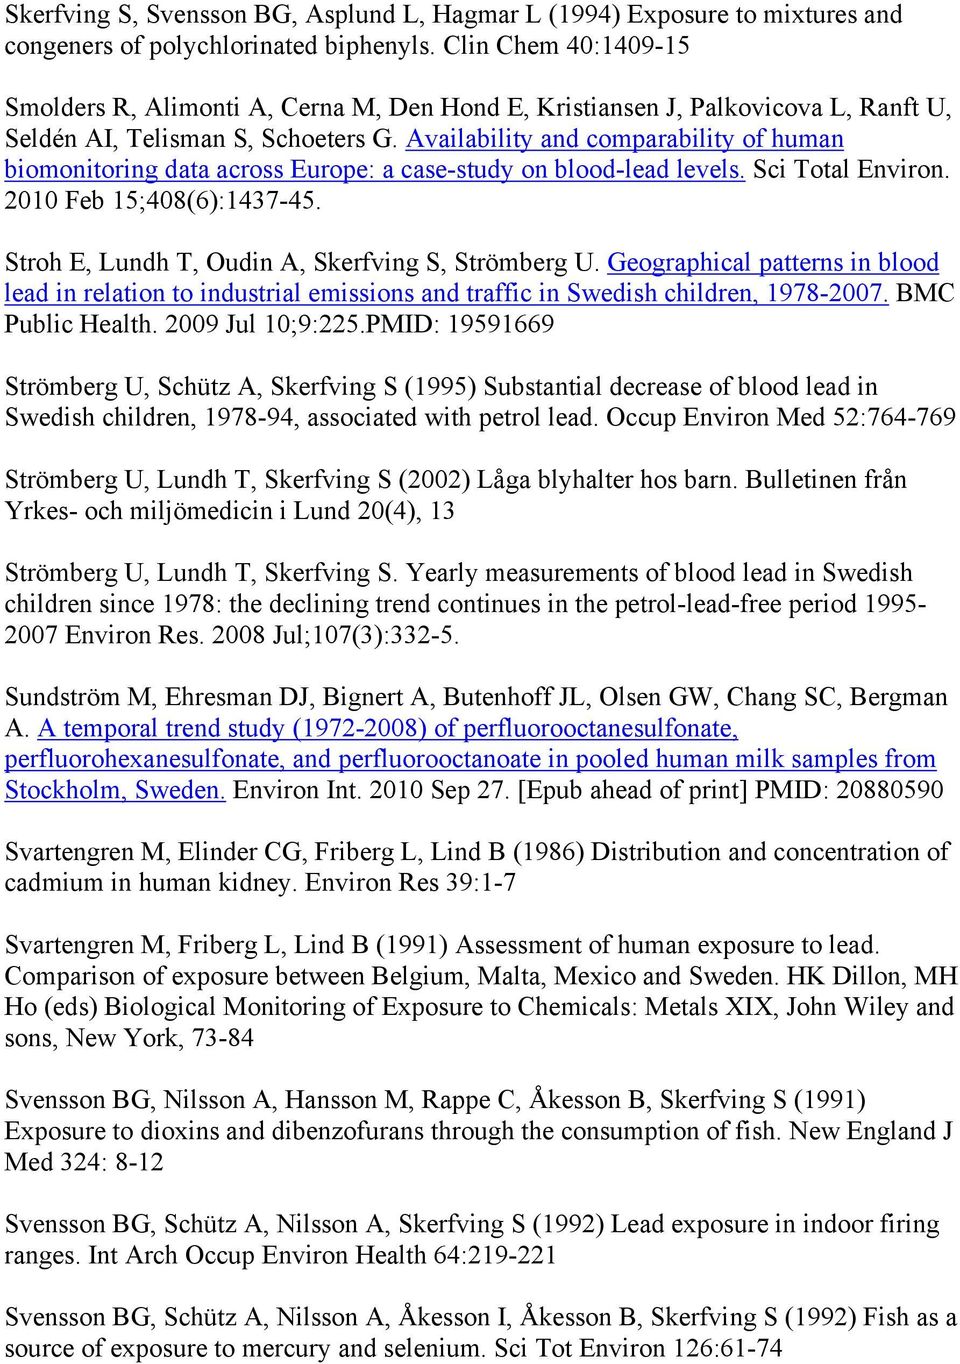 Availability and comparability of human biomonitoring data across Europe: a case-study on blood-lead levels. Sci Total Environ. 2010 Feb 15;408(6):1437-45.